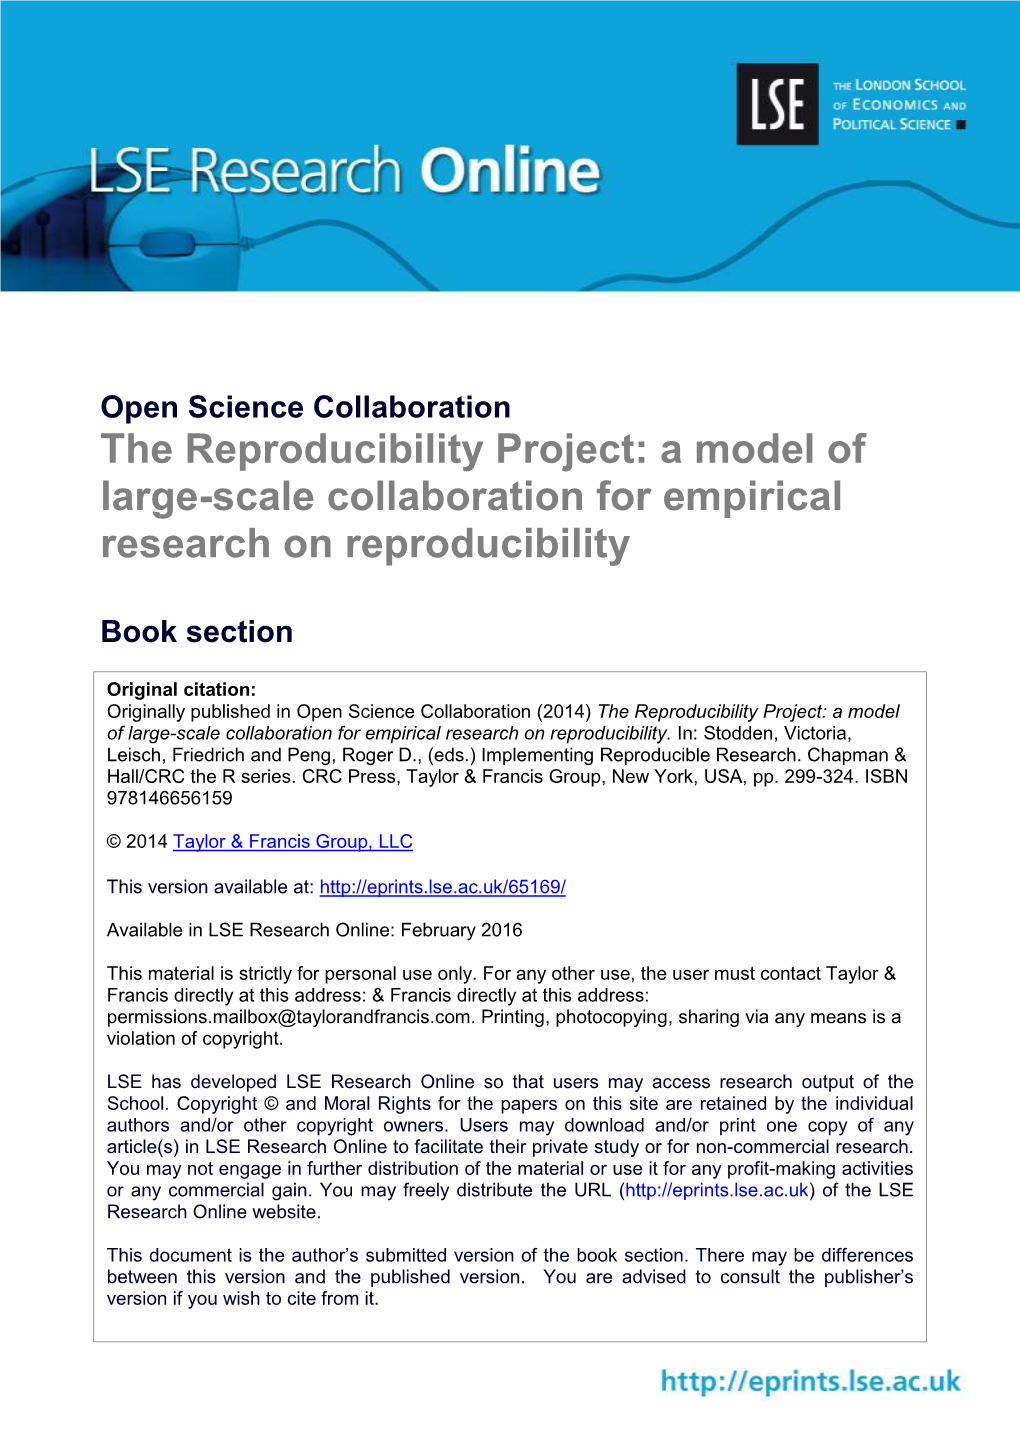 The Reproducibility Project: a Model of Large-Scale Collaboration for Empirical Research on Reproducibility